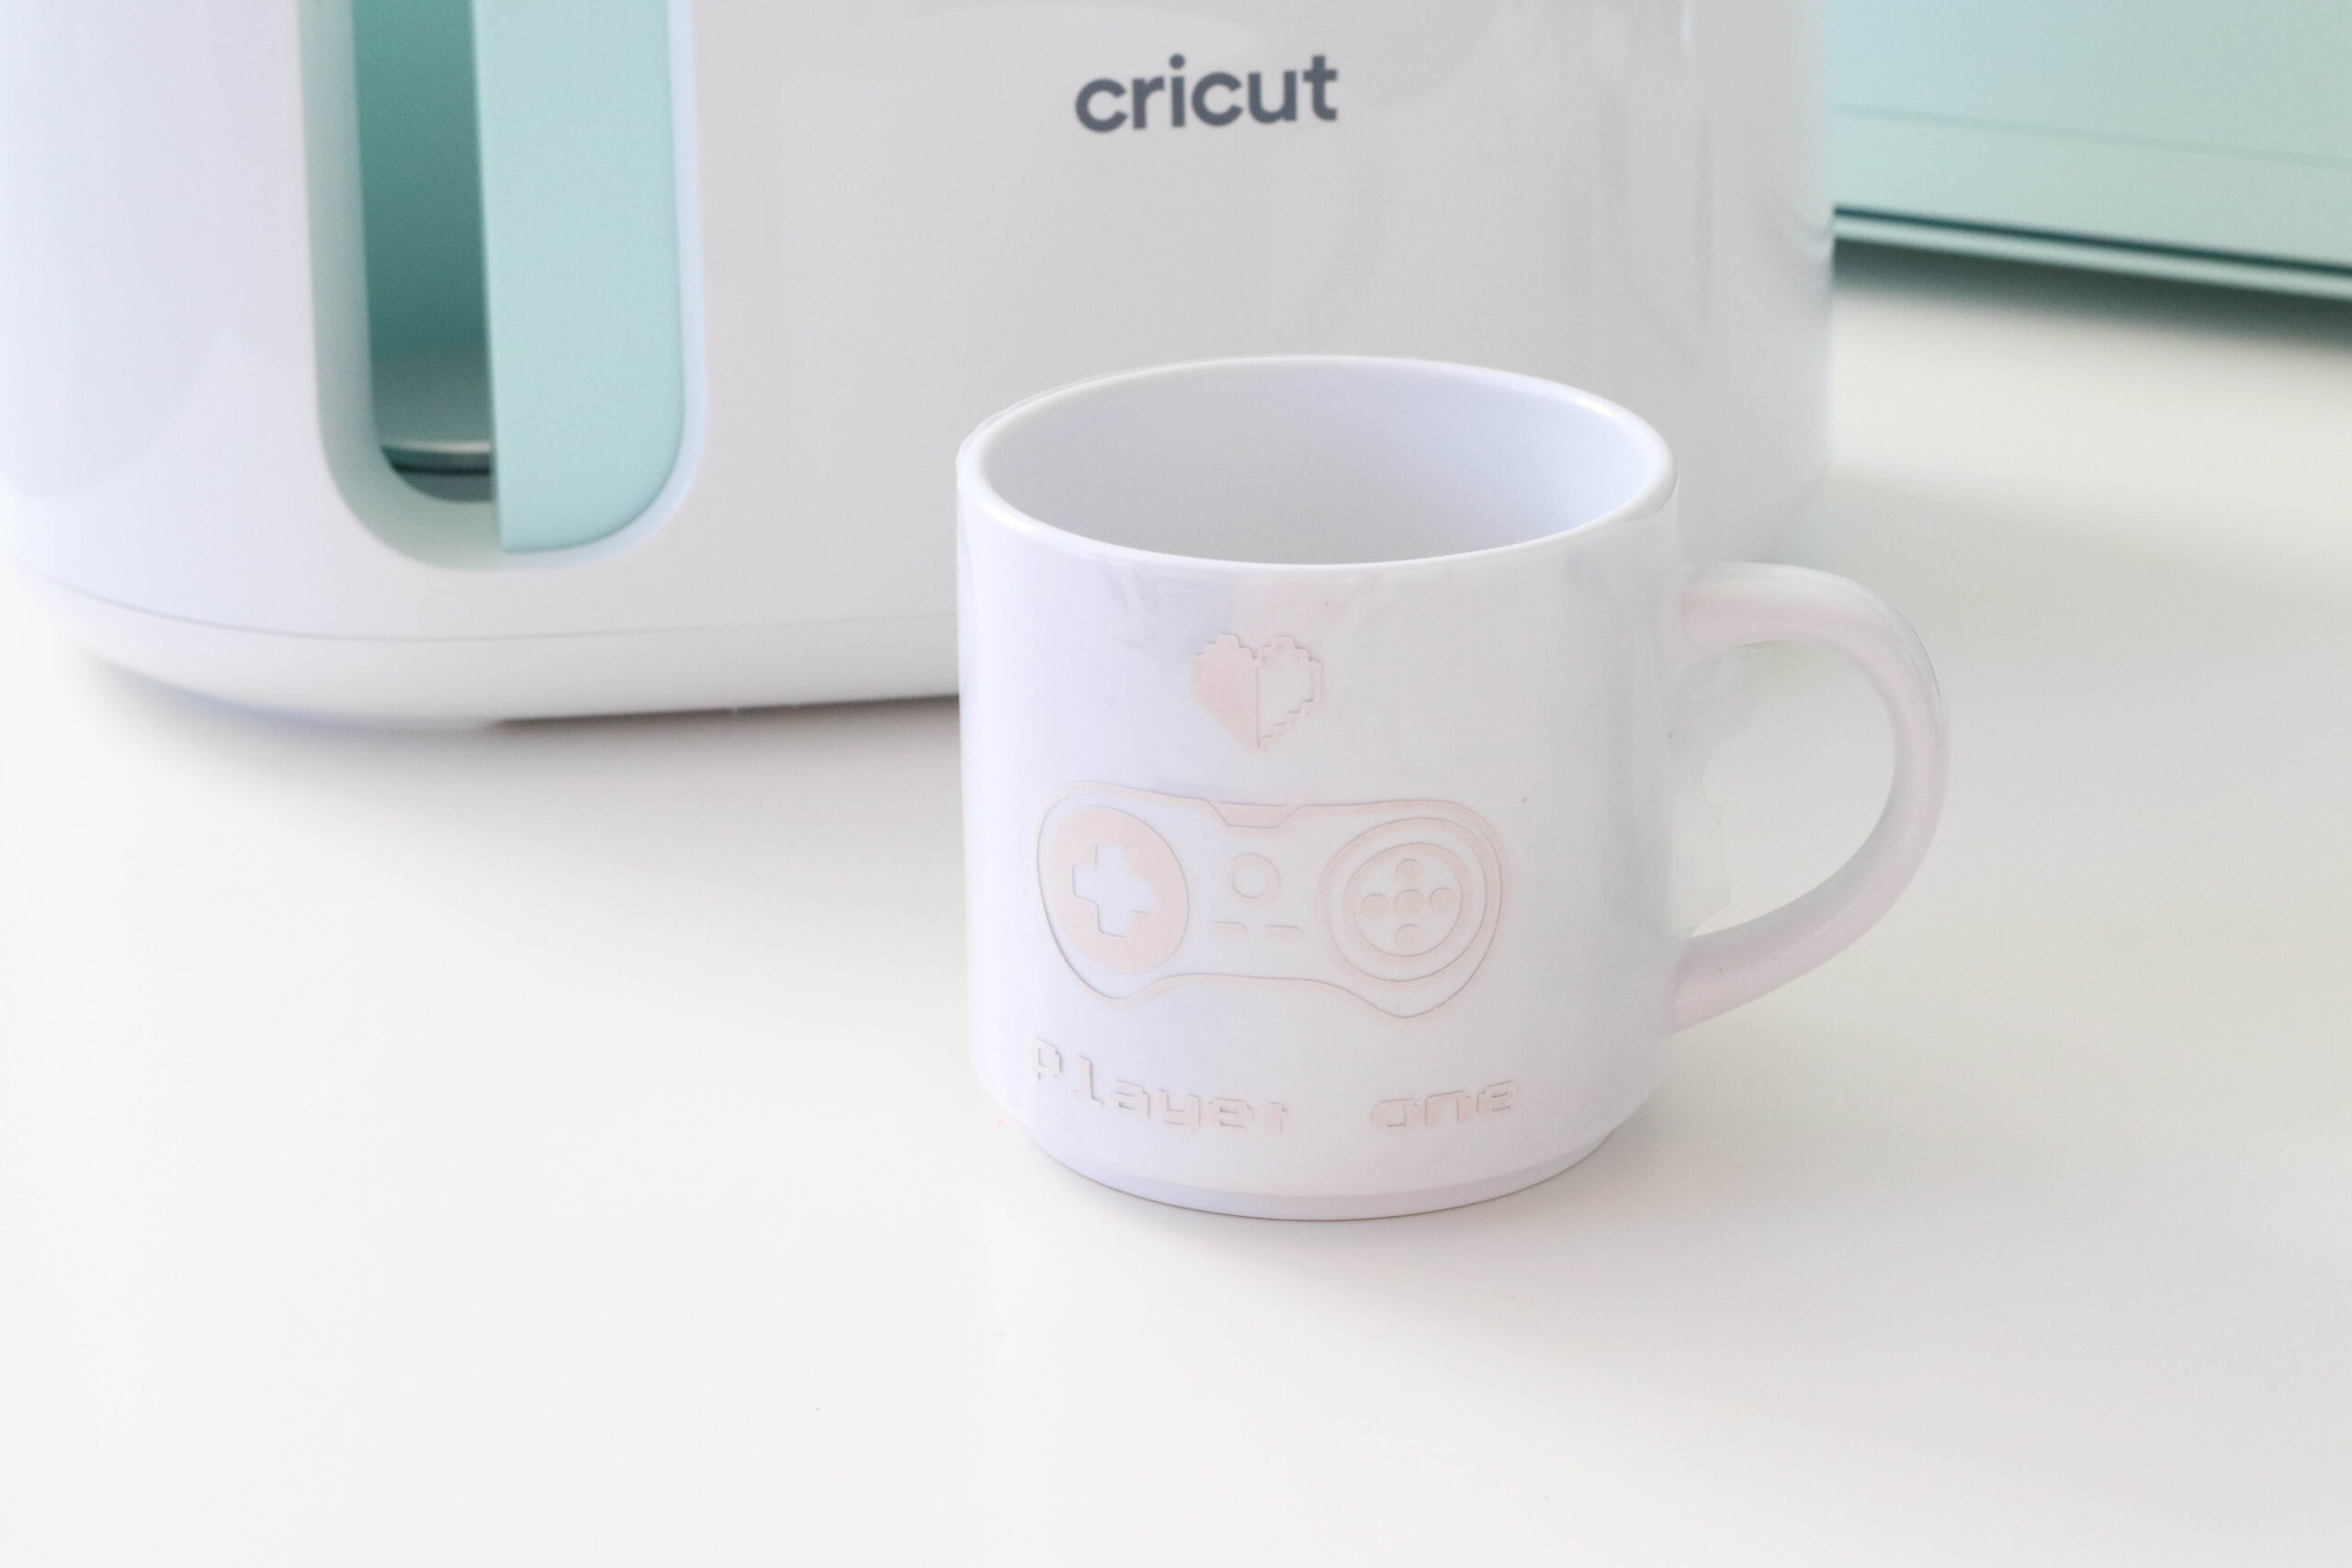 How To Create Your Own Mugs Using The Cricut Mug Press - TWINKLE TWINKLE  LITTLE PARTY